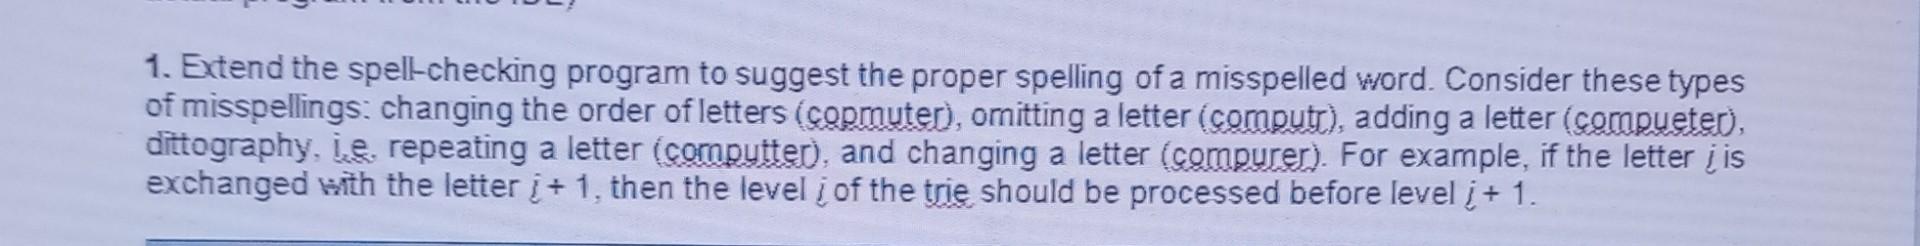 1. Extend the spell-checking program to suggest the proper spelling of a misspelled word. Consider these